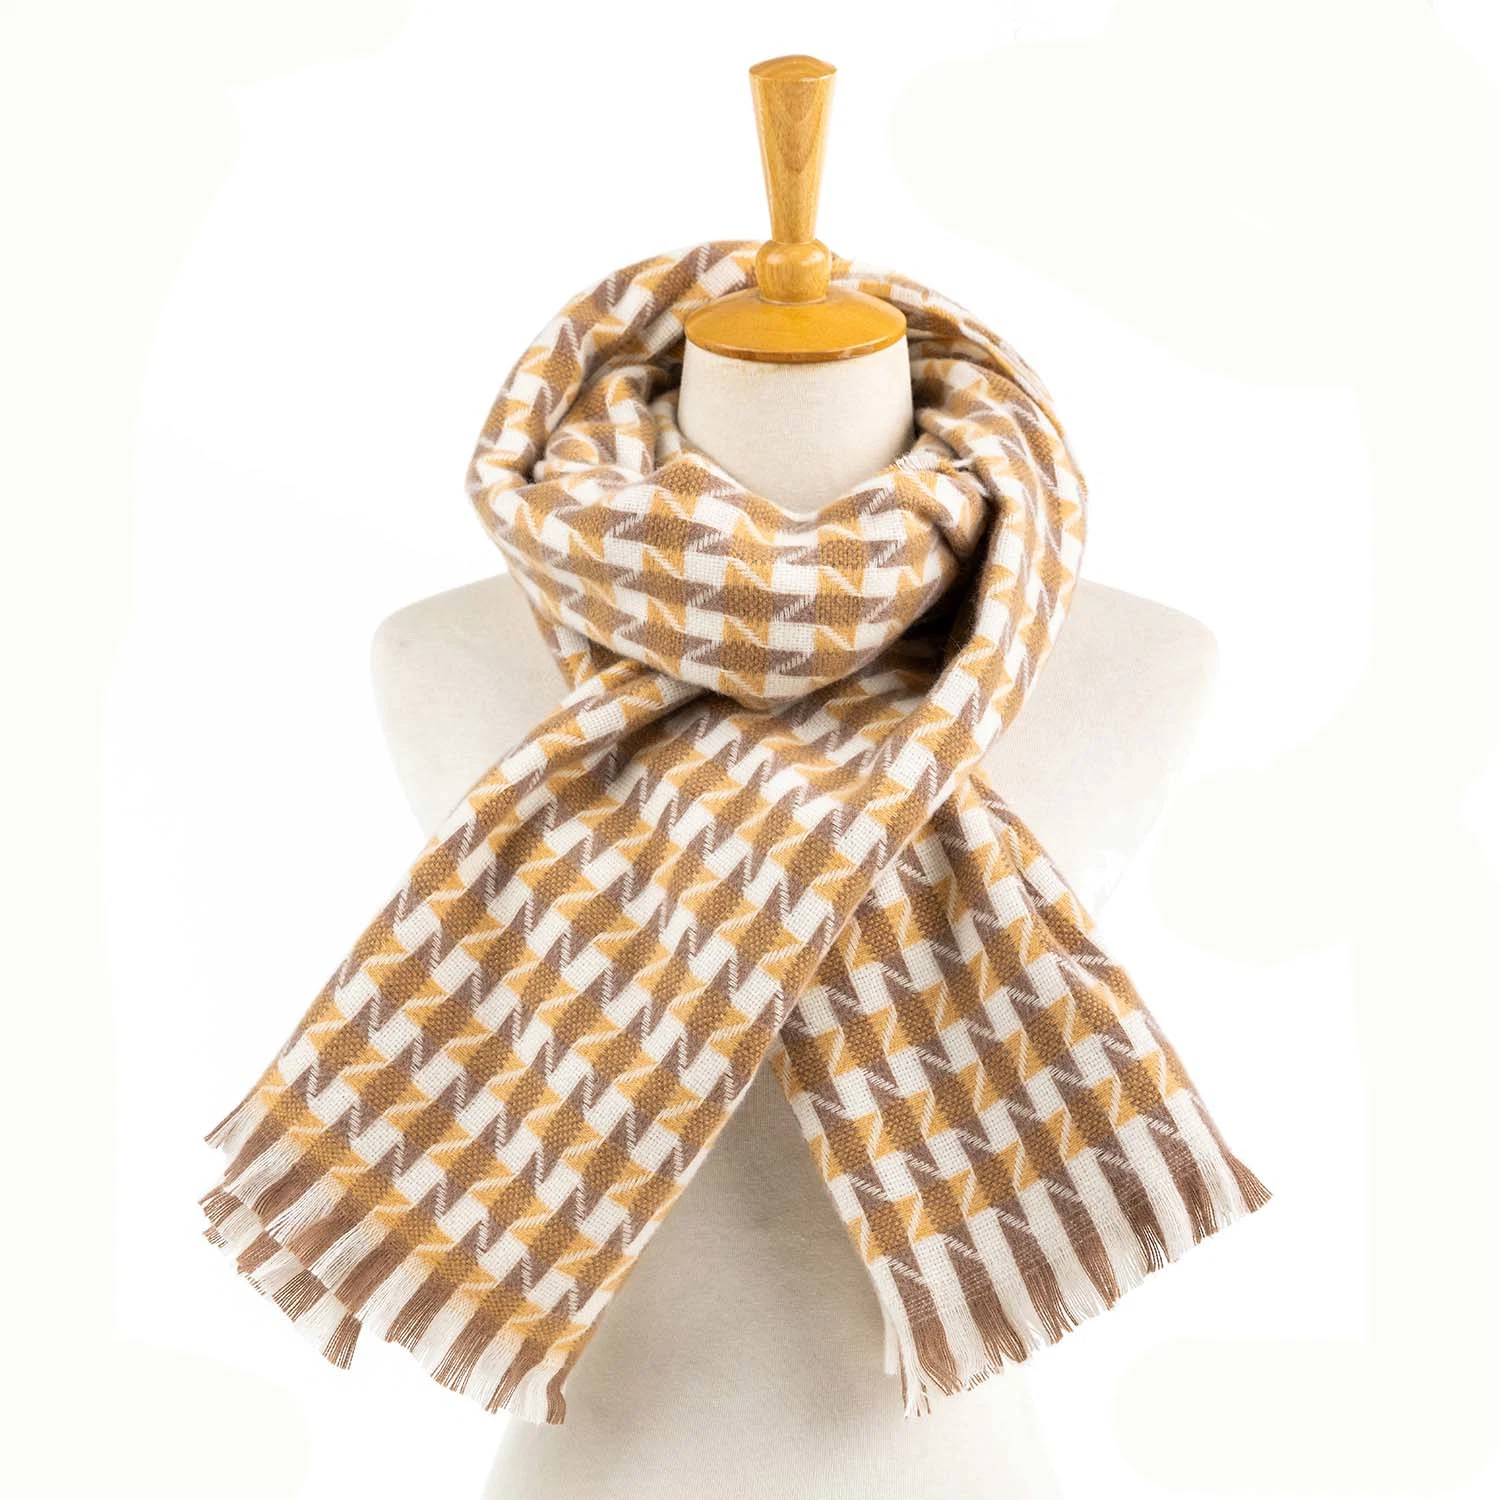 Wholesale/Supplierr Outerwear Apparel Accessory Woman Winter Warm Camel Cashmere Feel Woven Tassel Grid Checks Stoles Shawl Pashmina Character Blanket Scarf